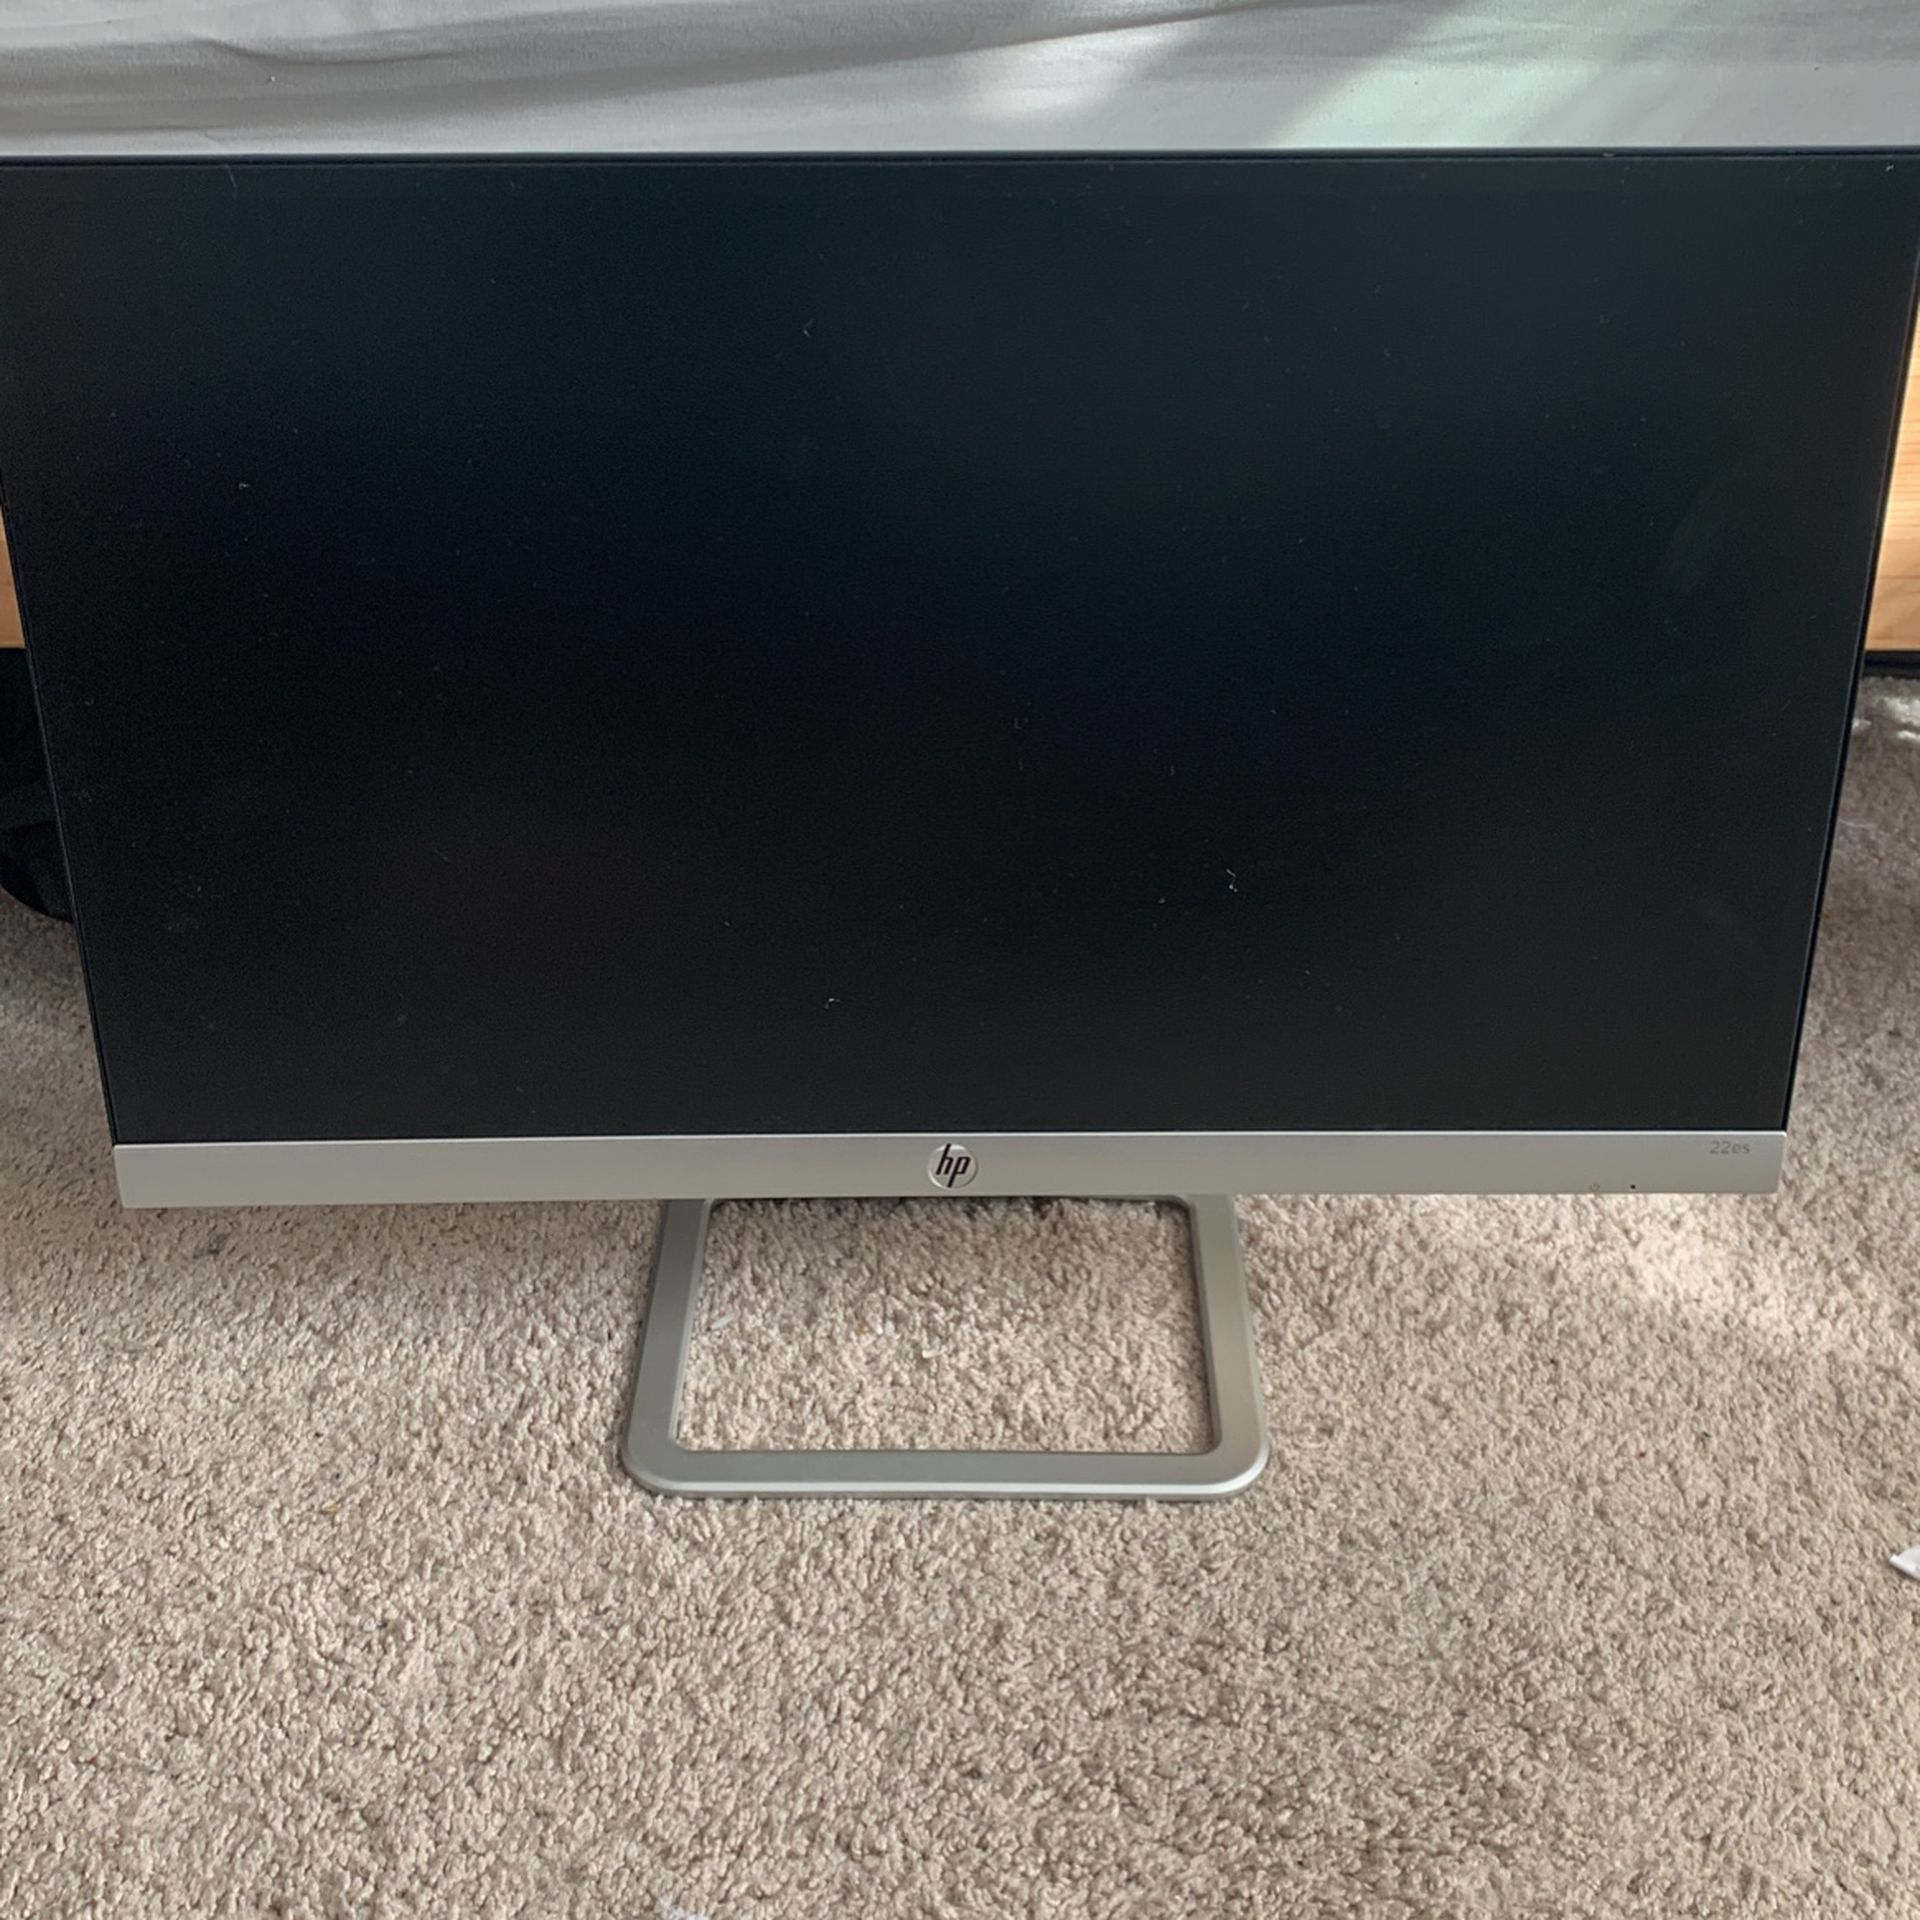 HD Monitor 21.5in with stand